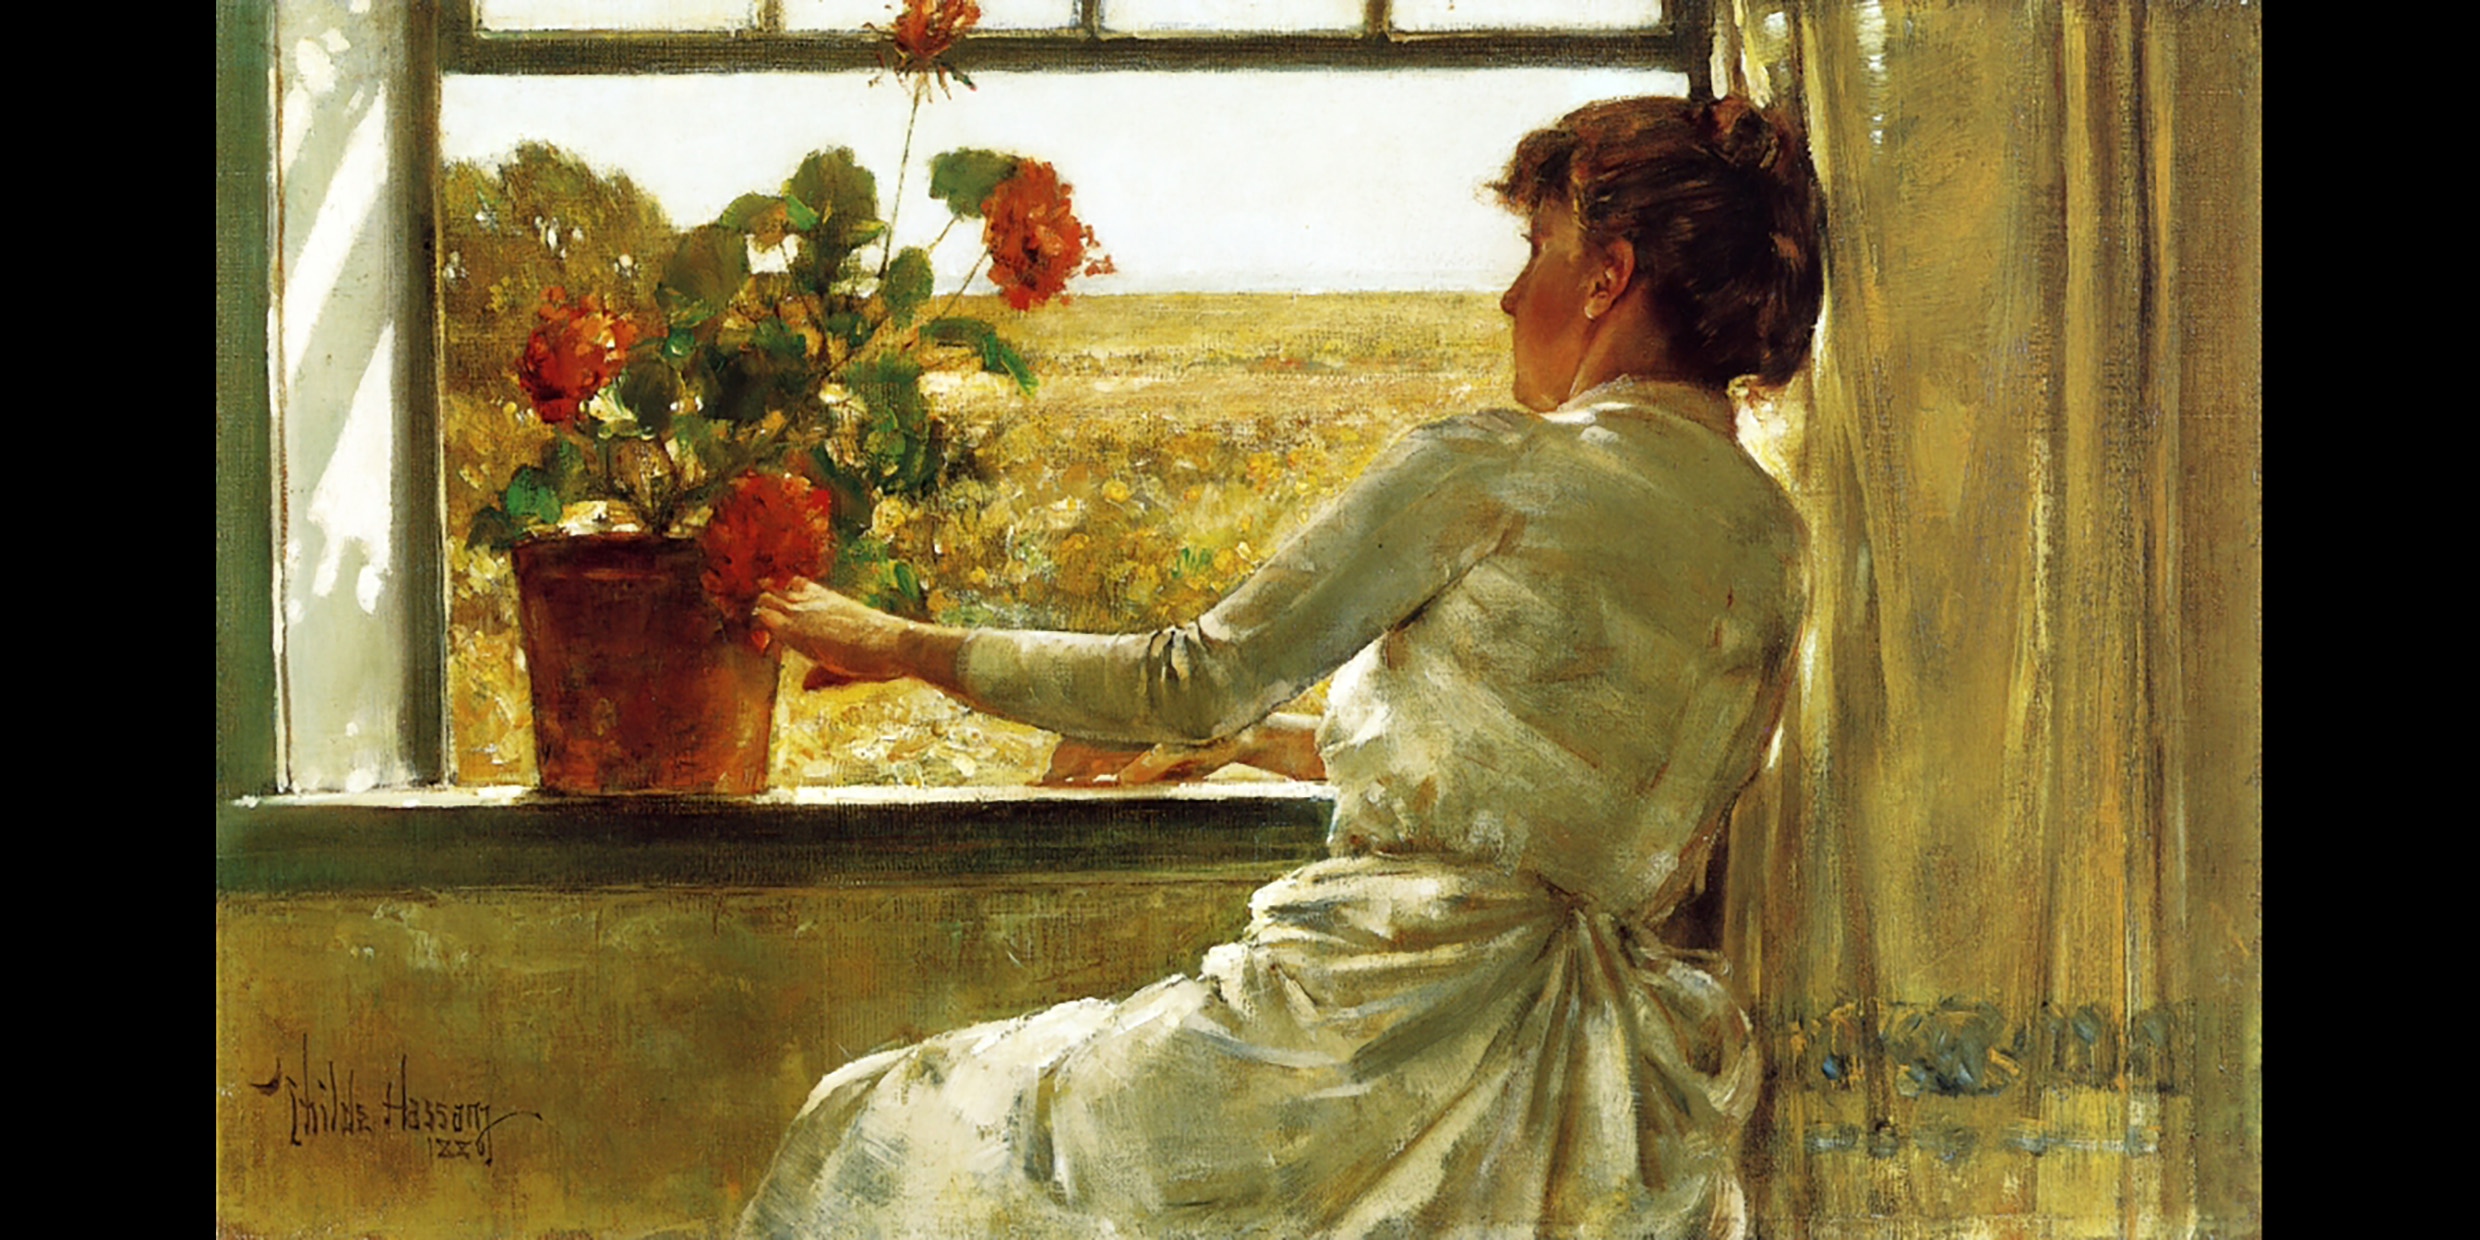 Painting of a seated woman looking out a window at a golden yellow landscape